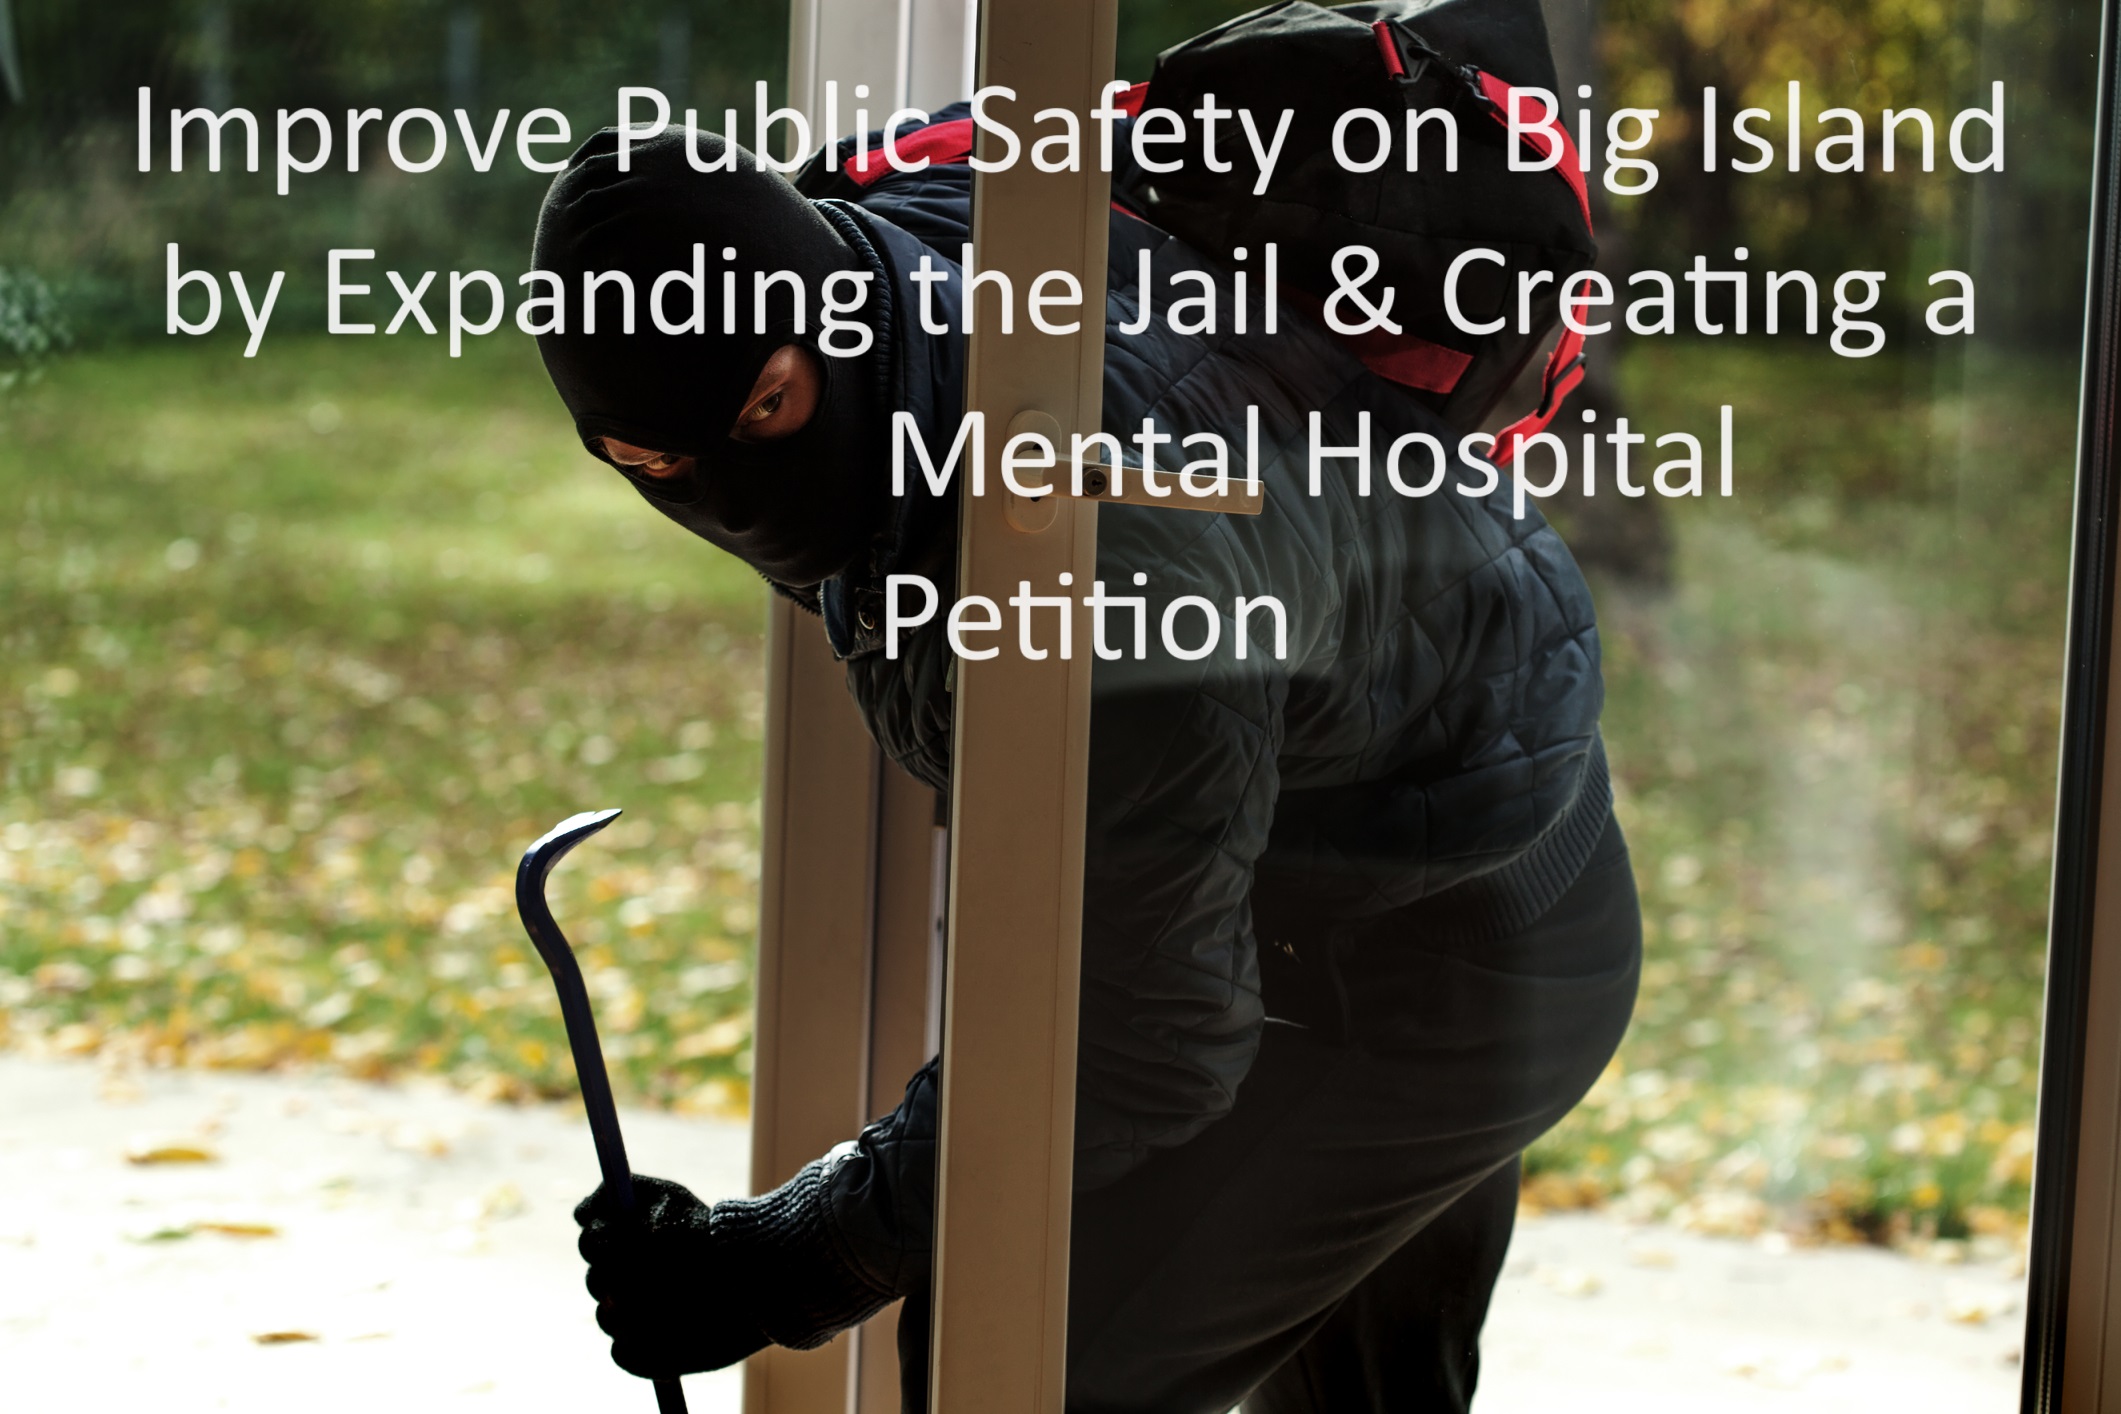 Public Safety Petition